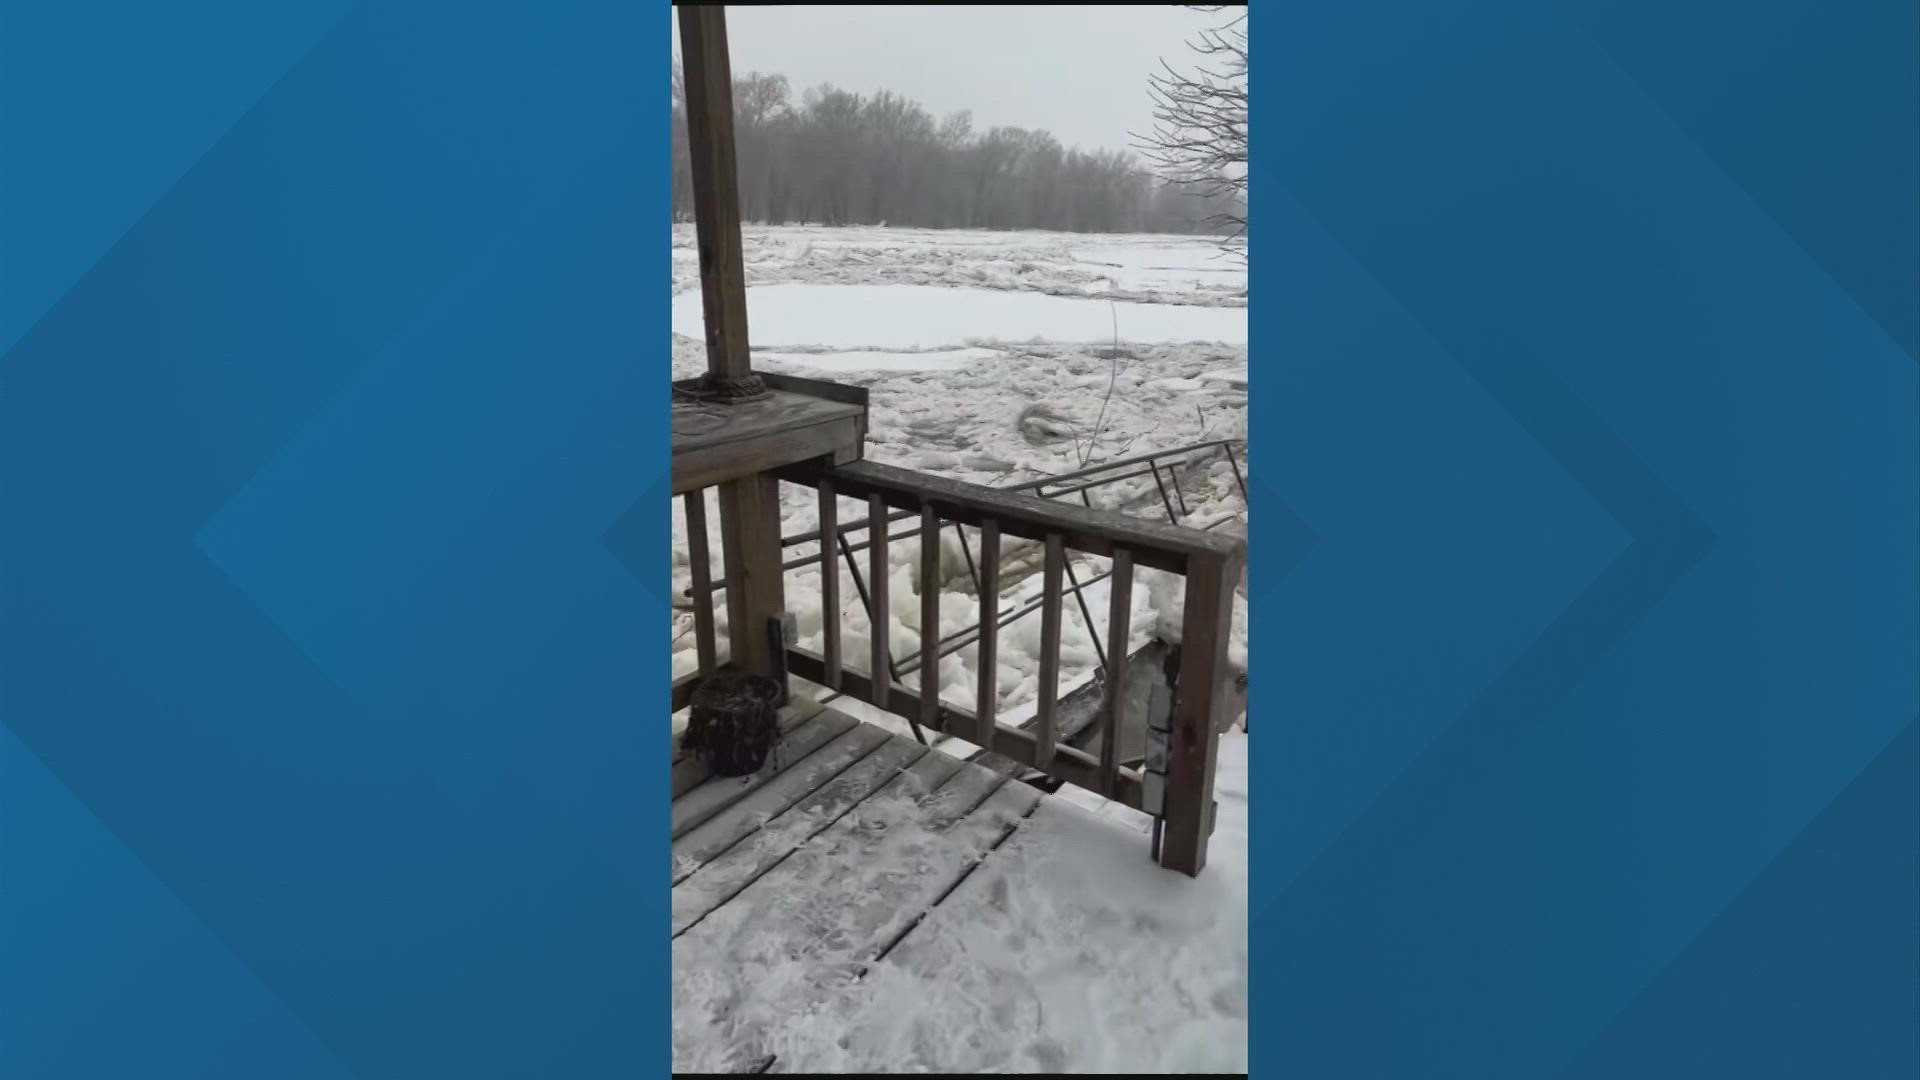 The winter weather last week caused the  Muskingum River to flood parts of the area.